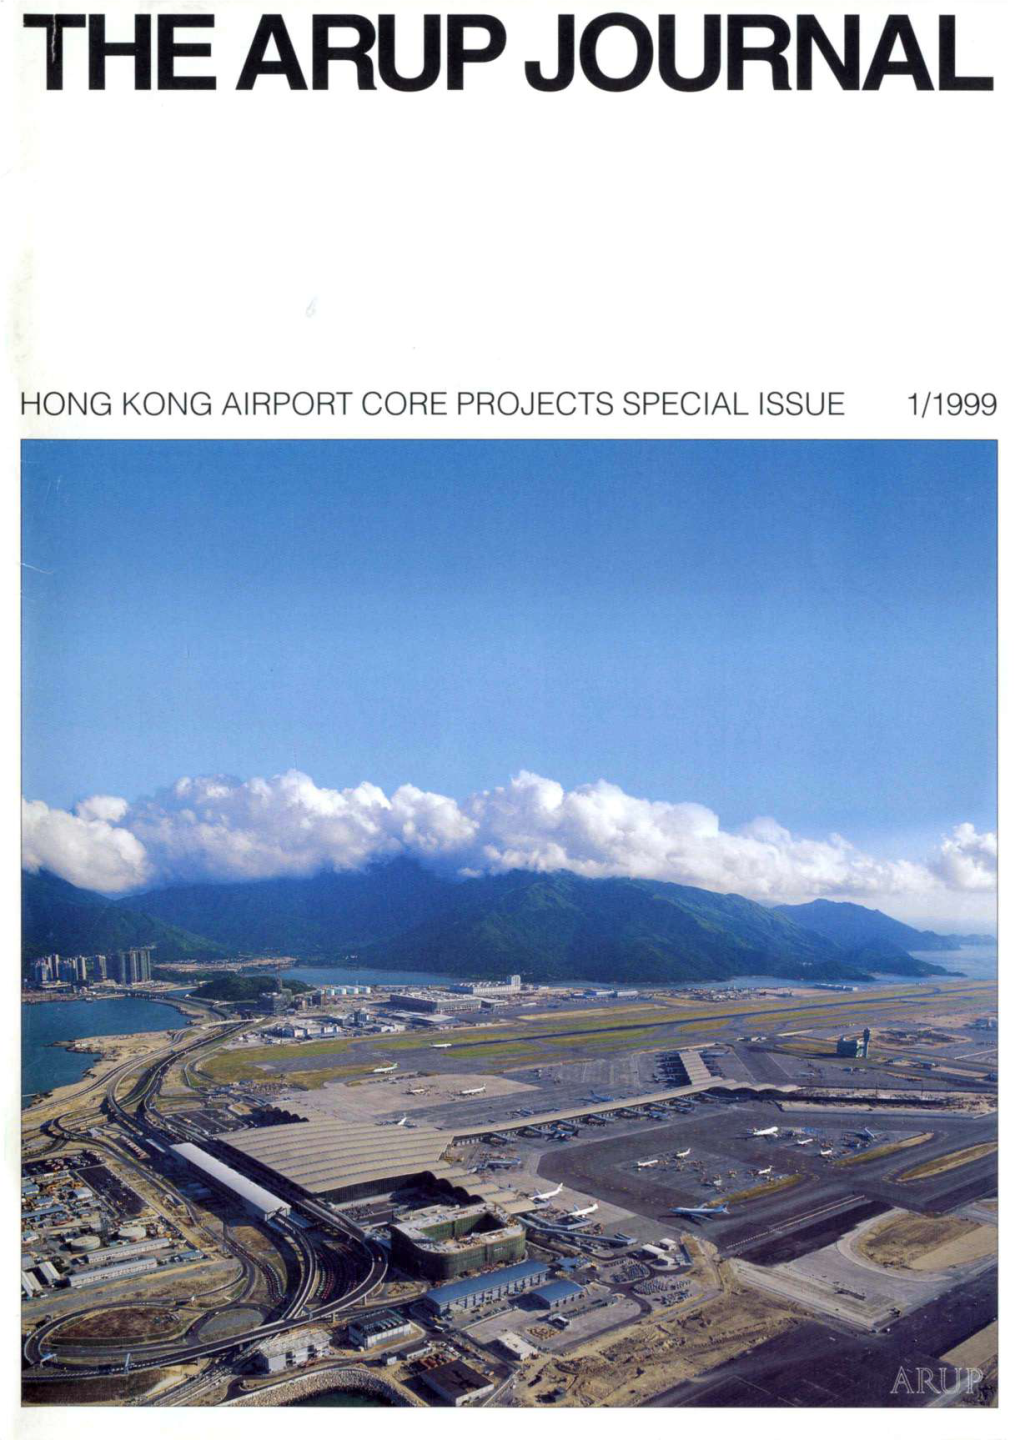 HONG KONG AIRPORT CORE PROJECTS SPECIAL ISSUE 1/1999 Vol